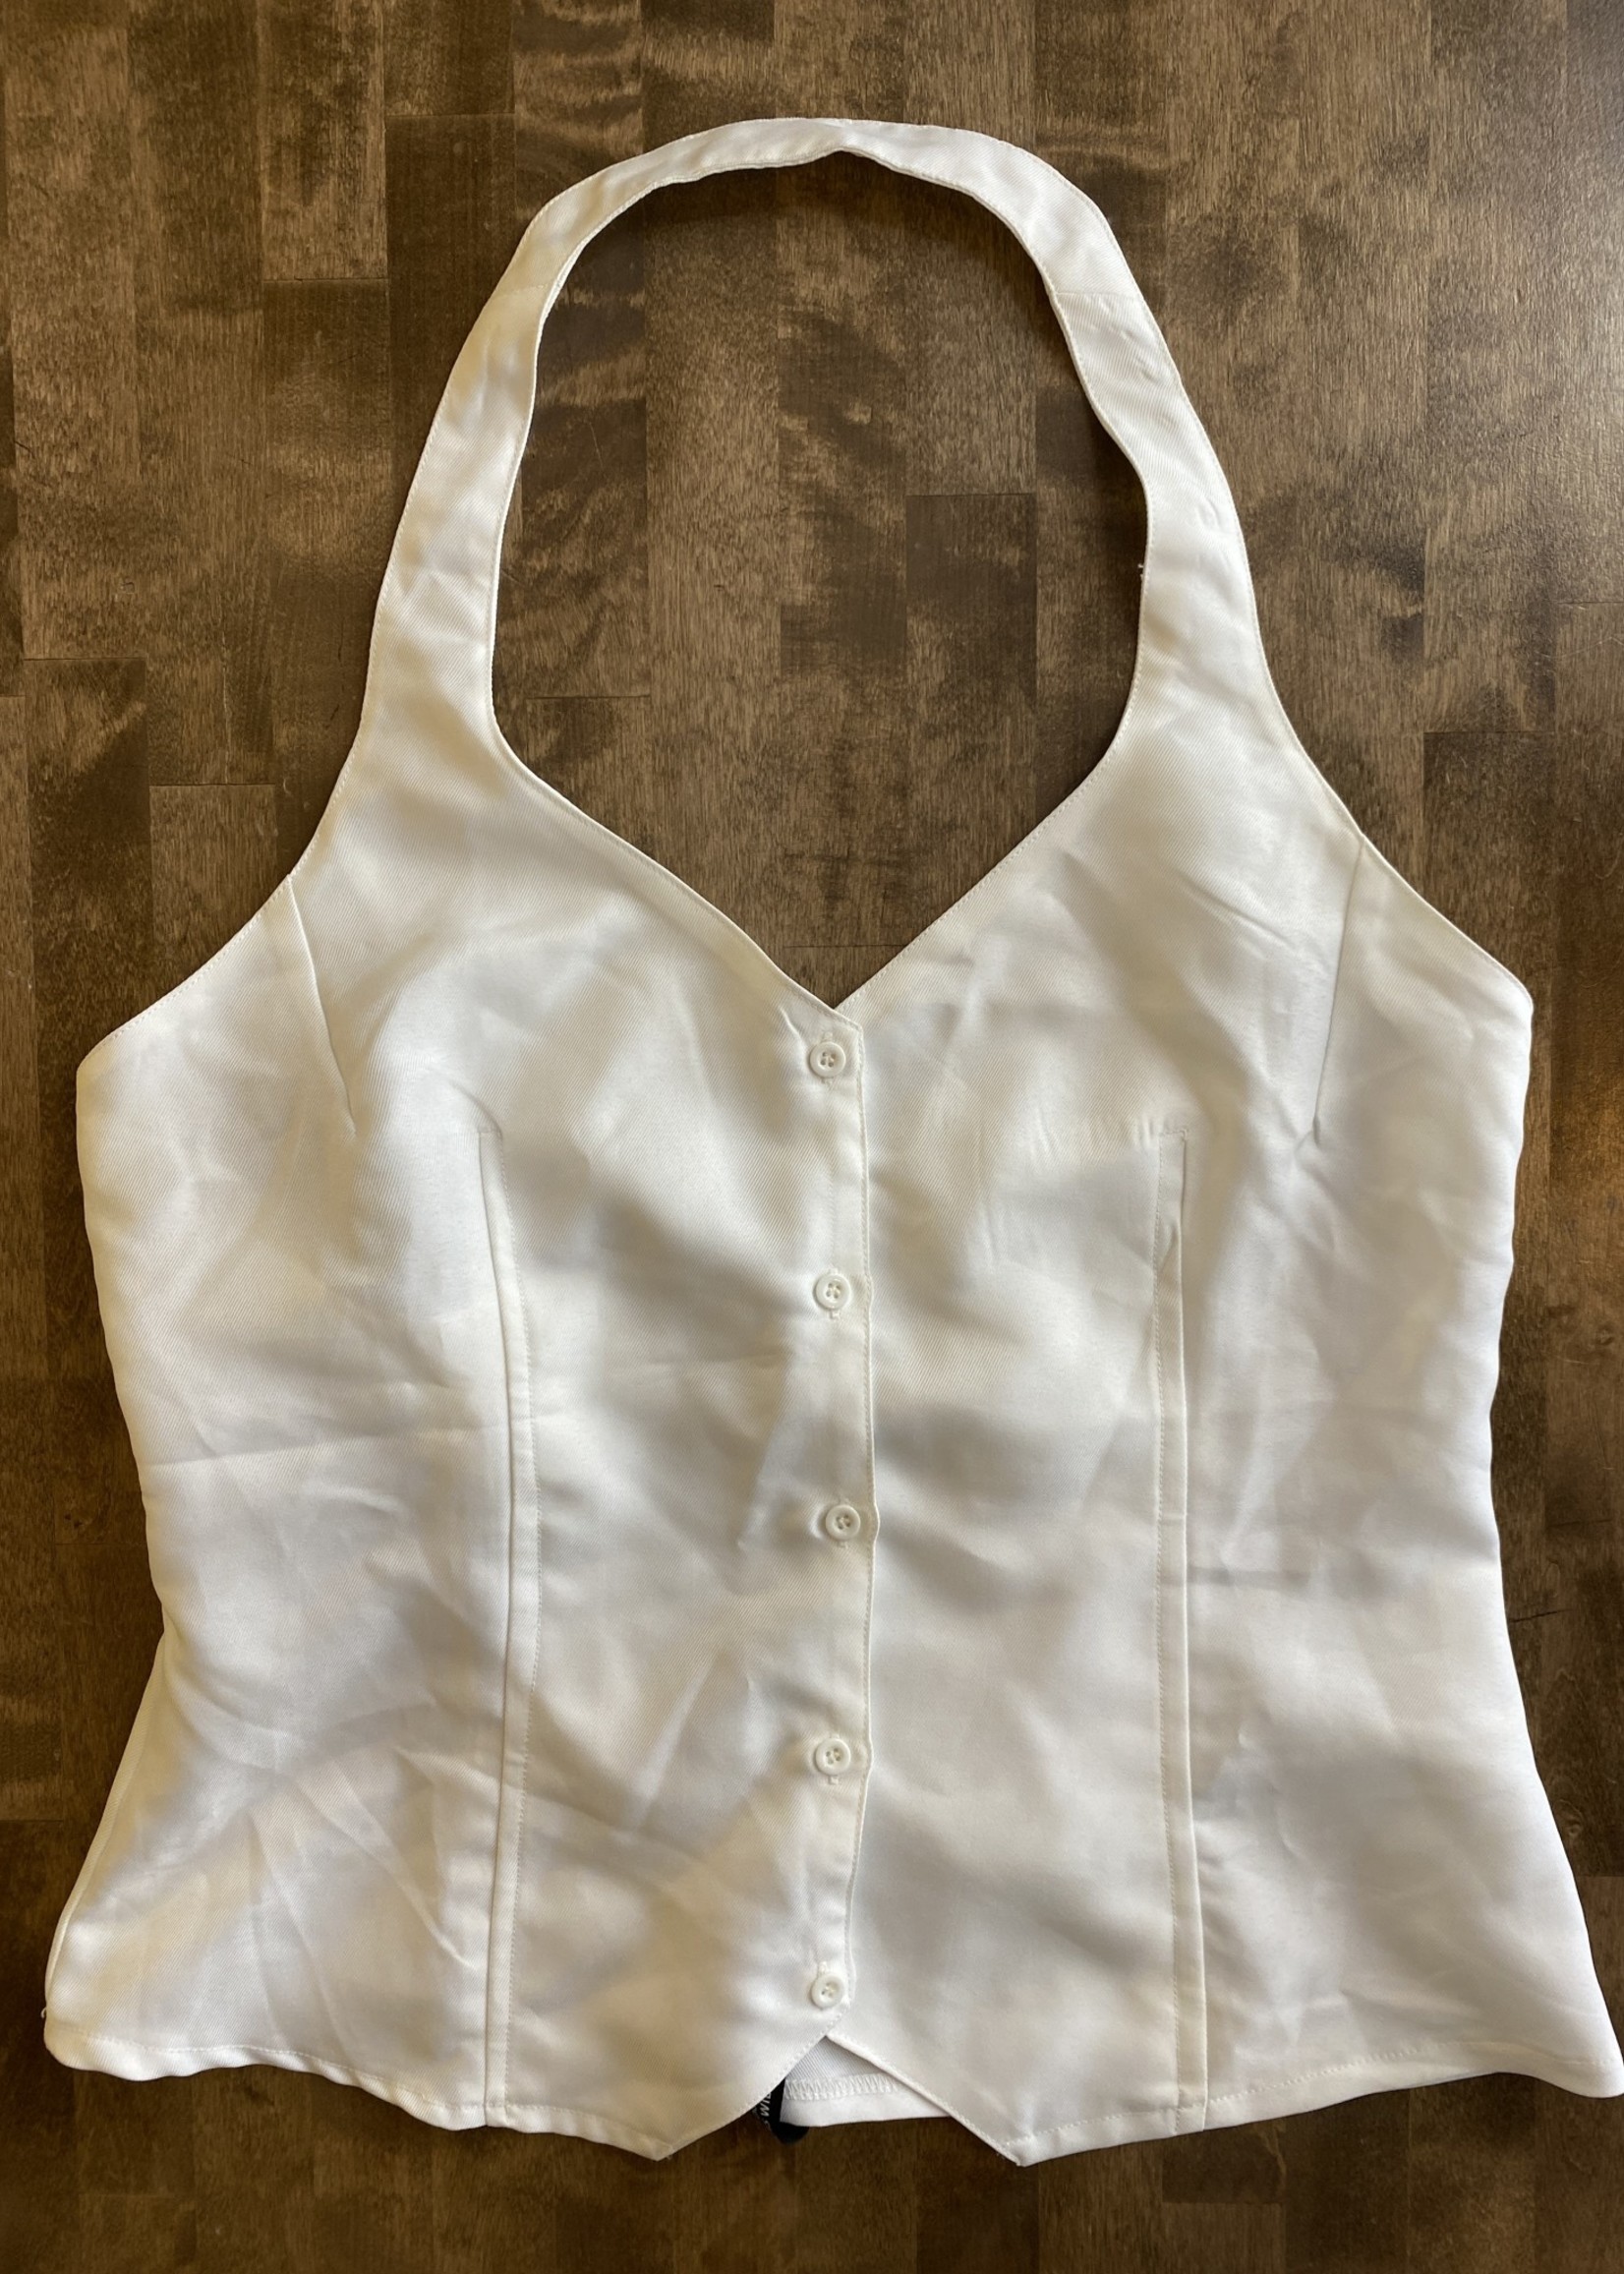 NWT Pretty Little Thing White Halter Top L